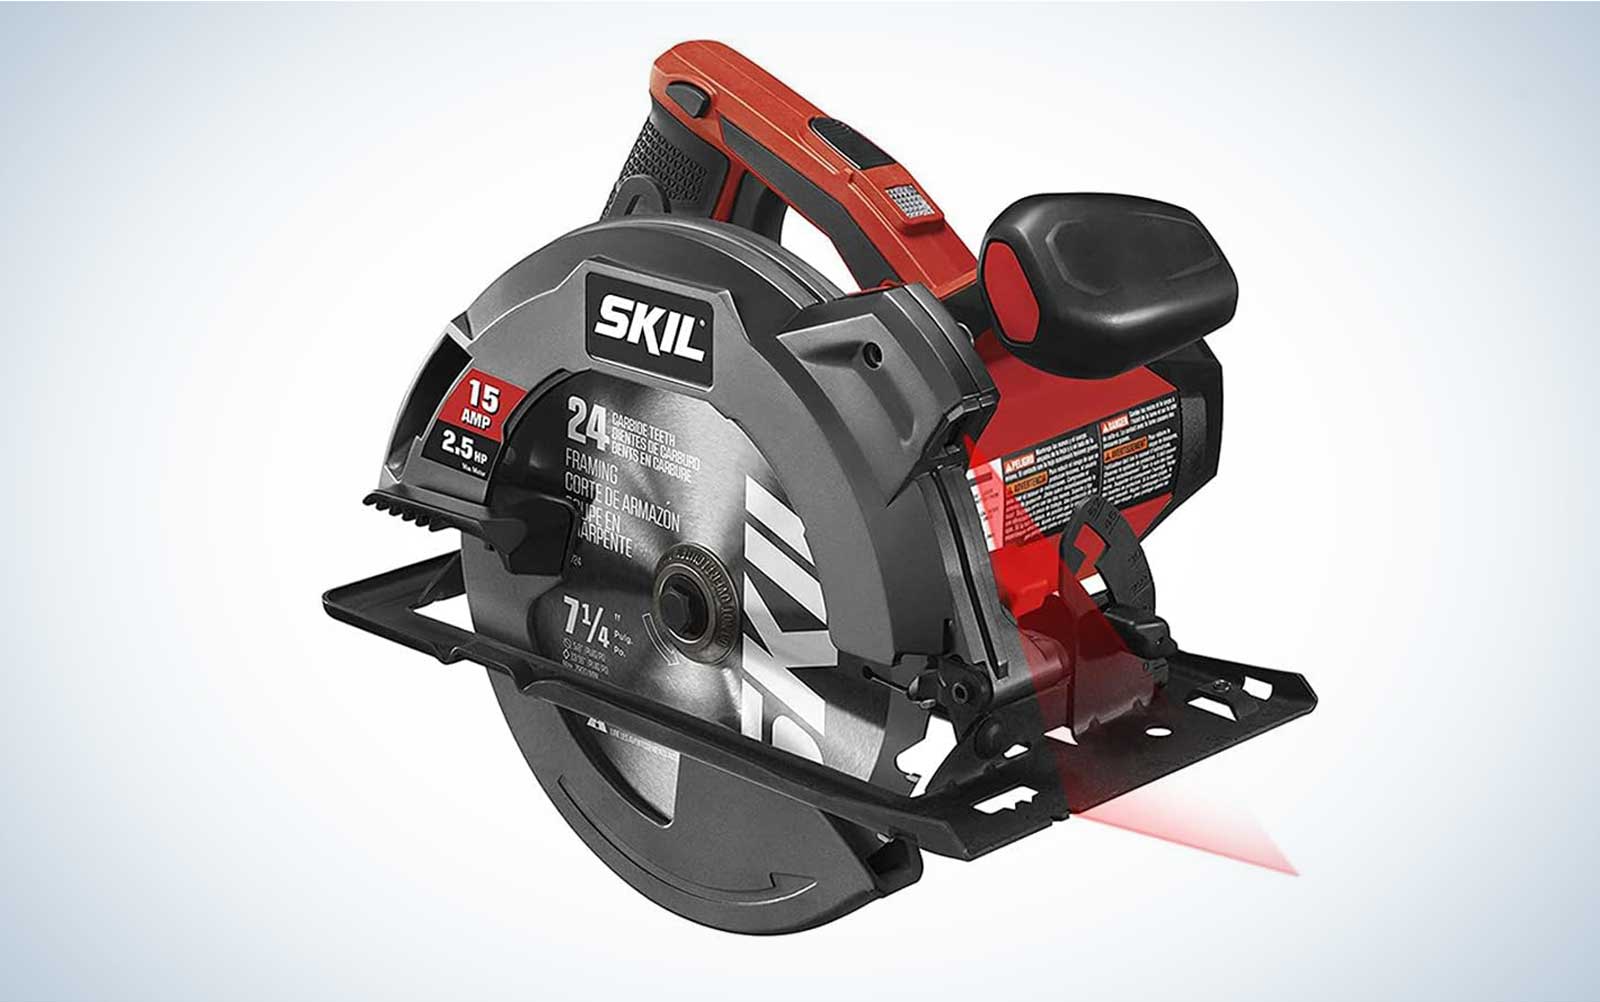 Skil 5280-01 15 Amp 7-1/4 Inch Circular Saw on a plain background with its laser level active